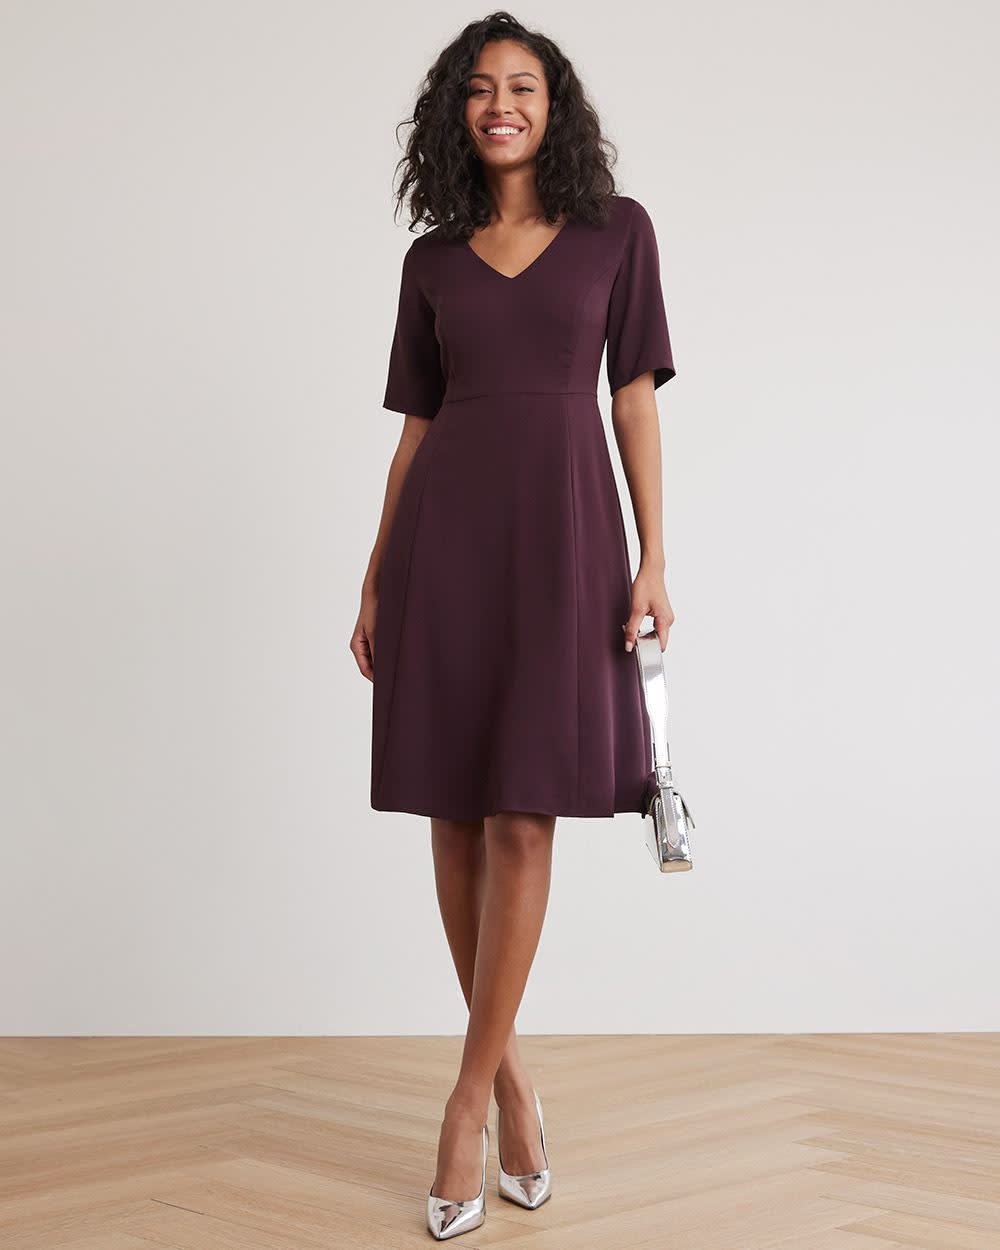 Short-Sleeve Fit and Flare Dress with V Neckline | RW&CO.